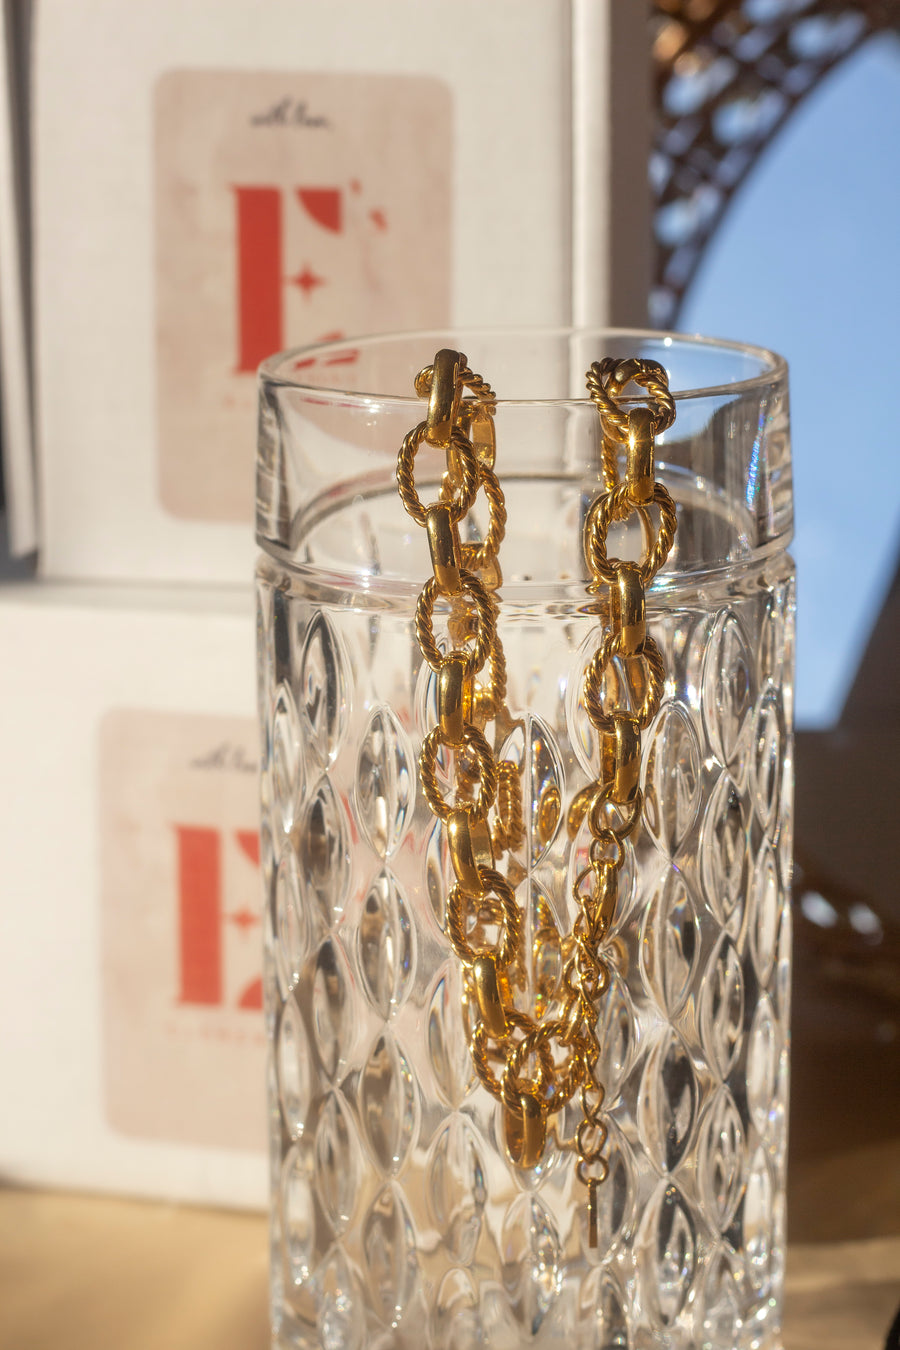 18k gold chain necklace with a rope pattern. The necklace is hanging on the edge of a glass cup. Rope Link Signature Chain by E's Element.